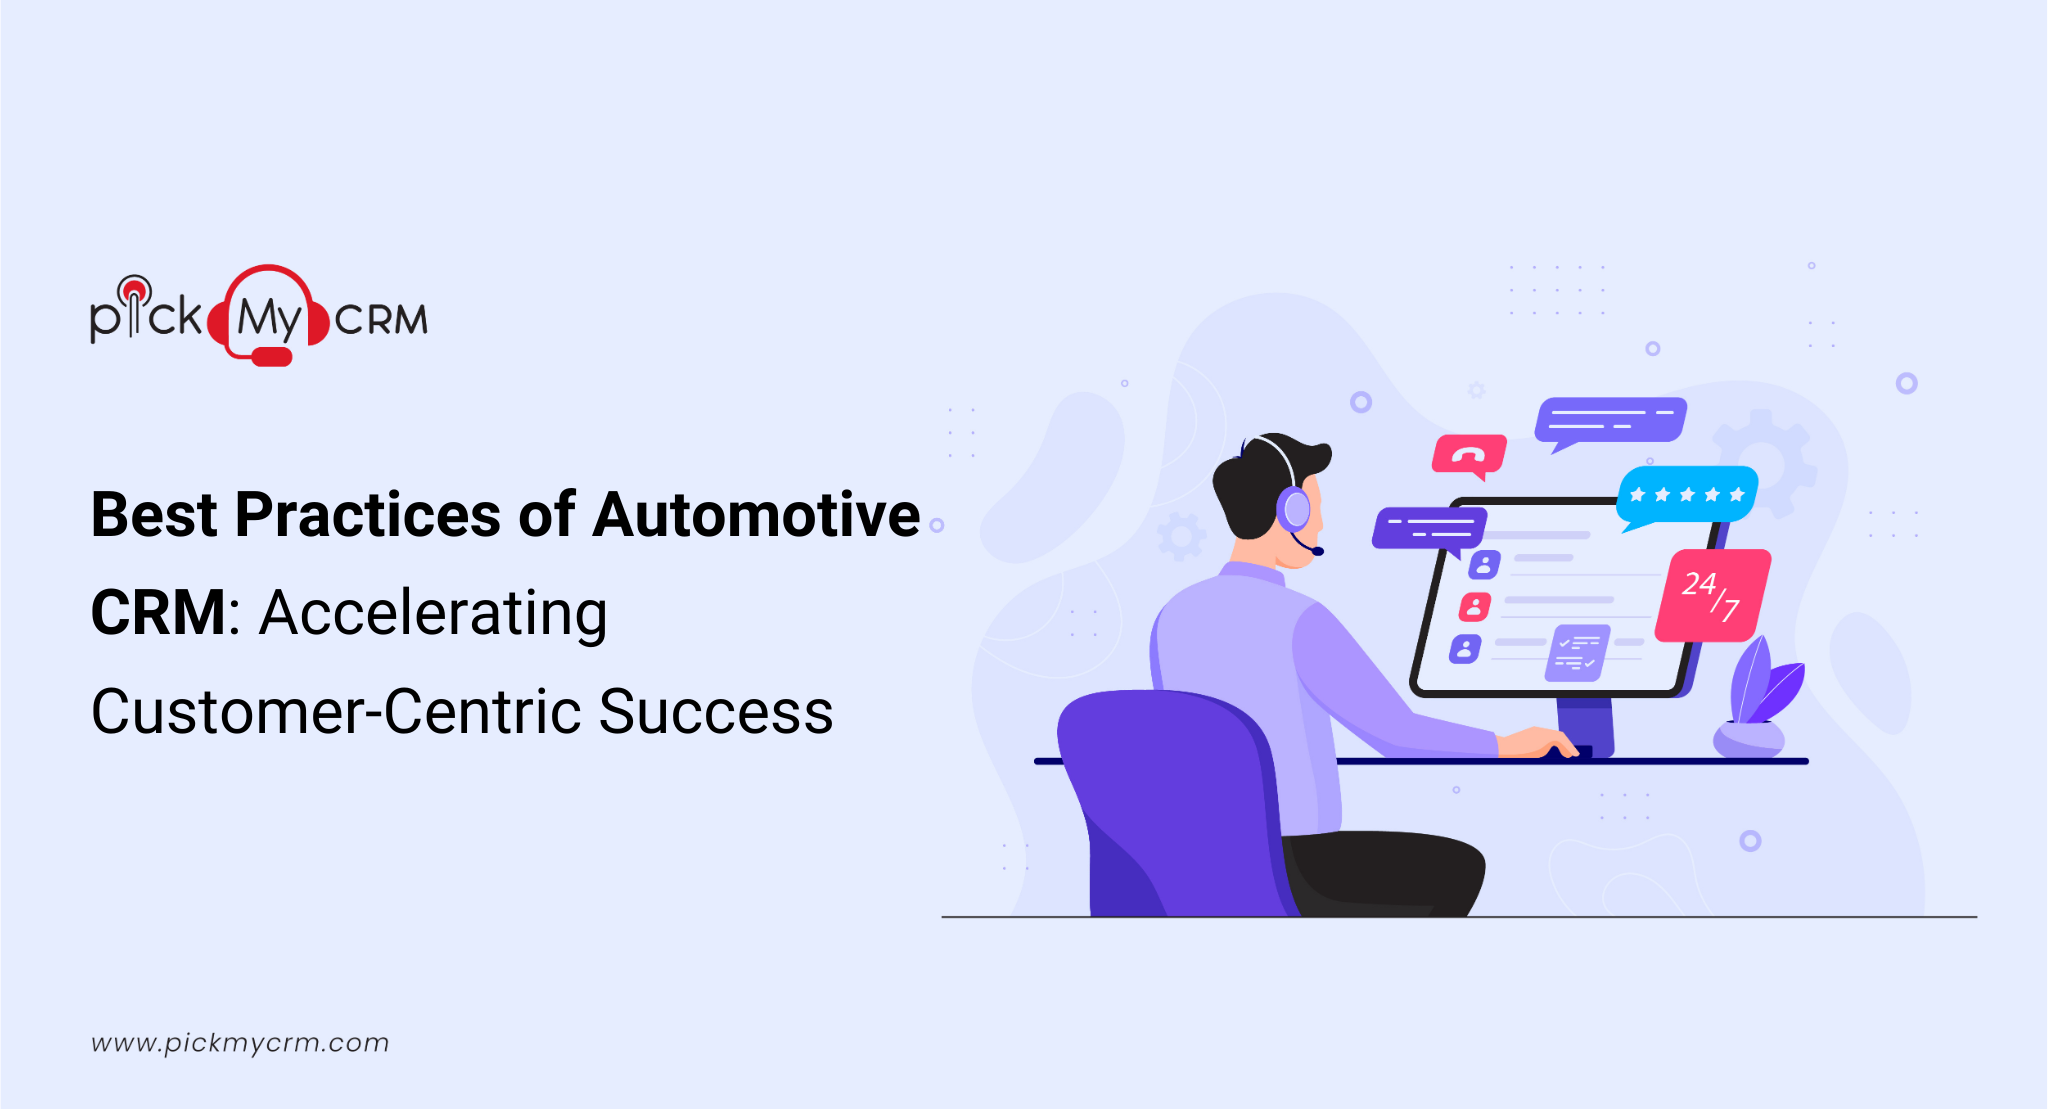 Best Practices of Automotive CRM: Accelerating Customer-Centric Success